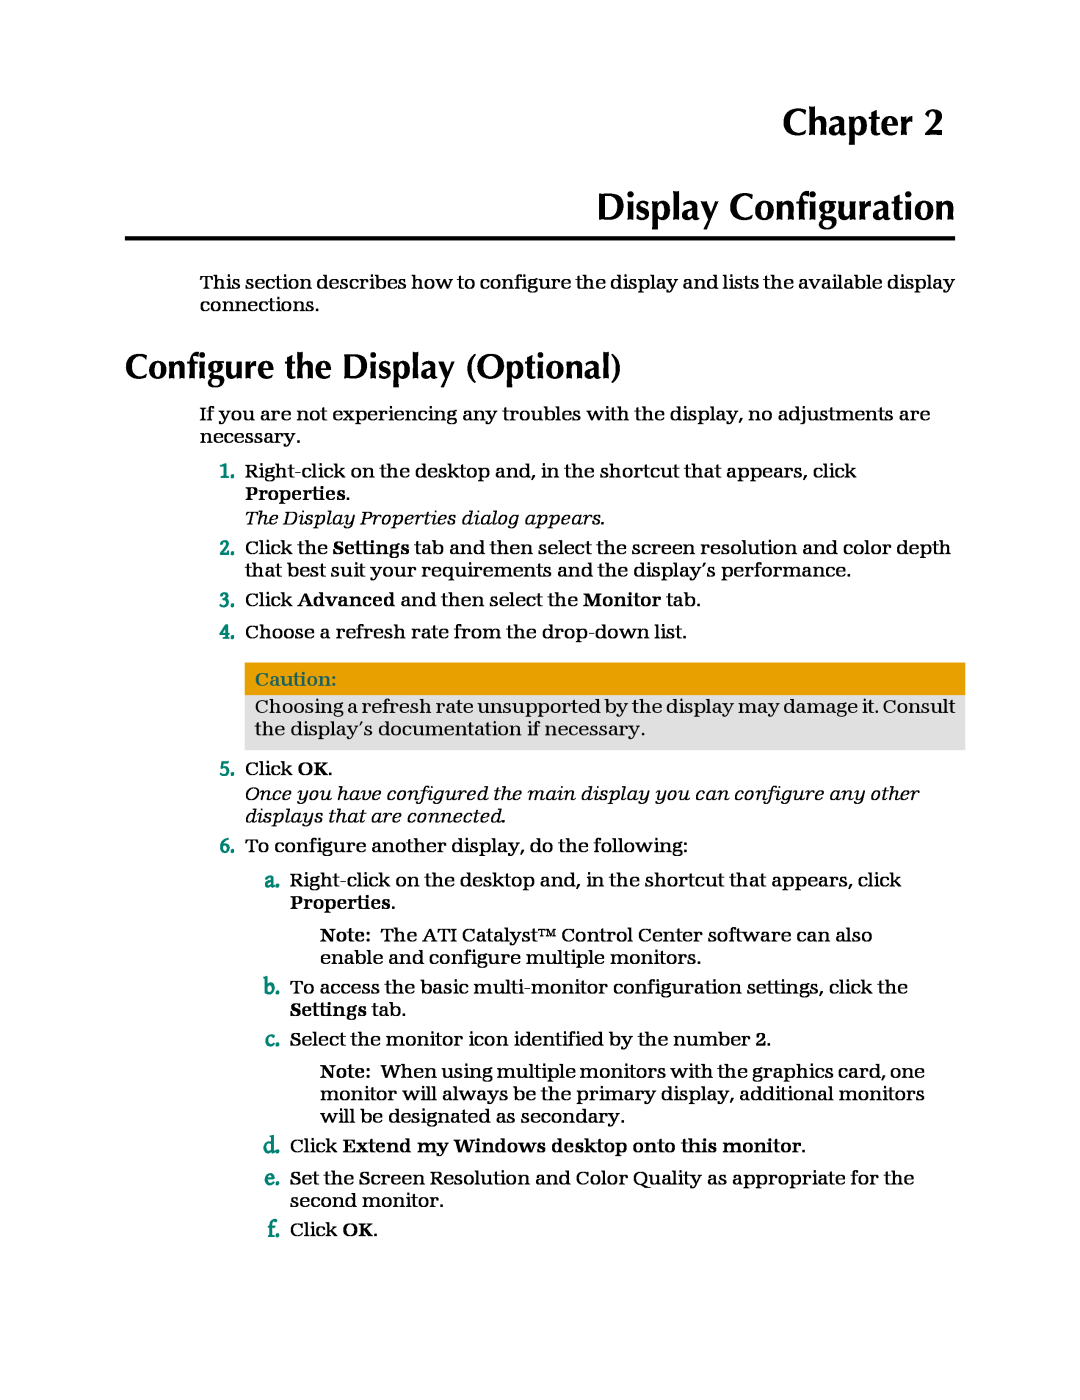 AMD 4850 manual Chapter Display Configuration, Configure the Display Optional, The Display Properties dialog appears 